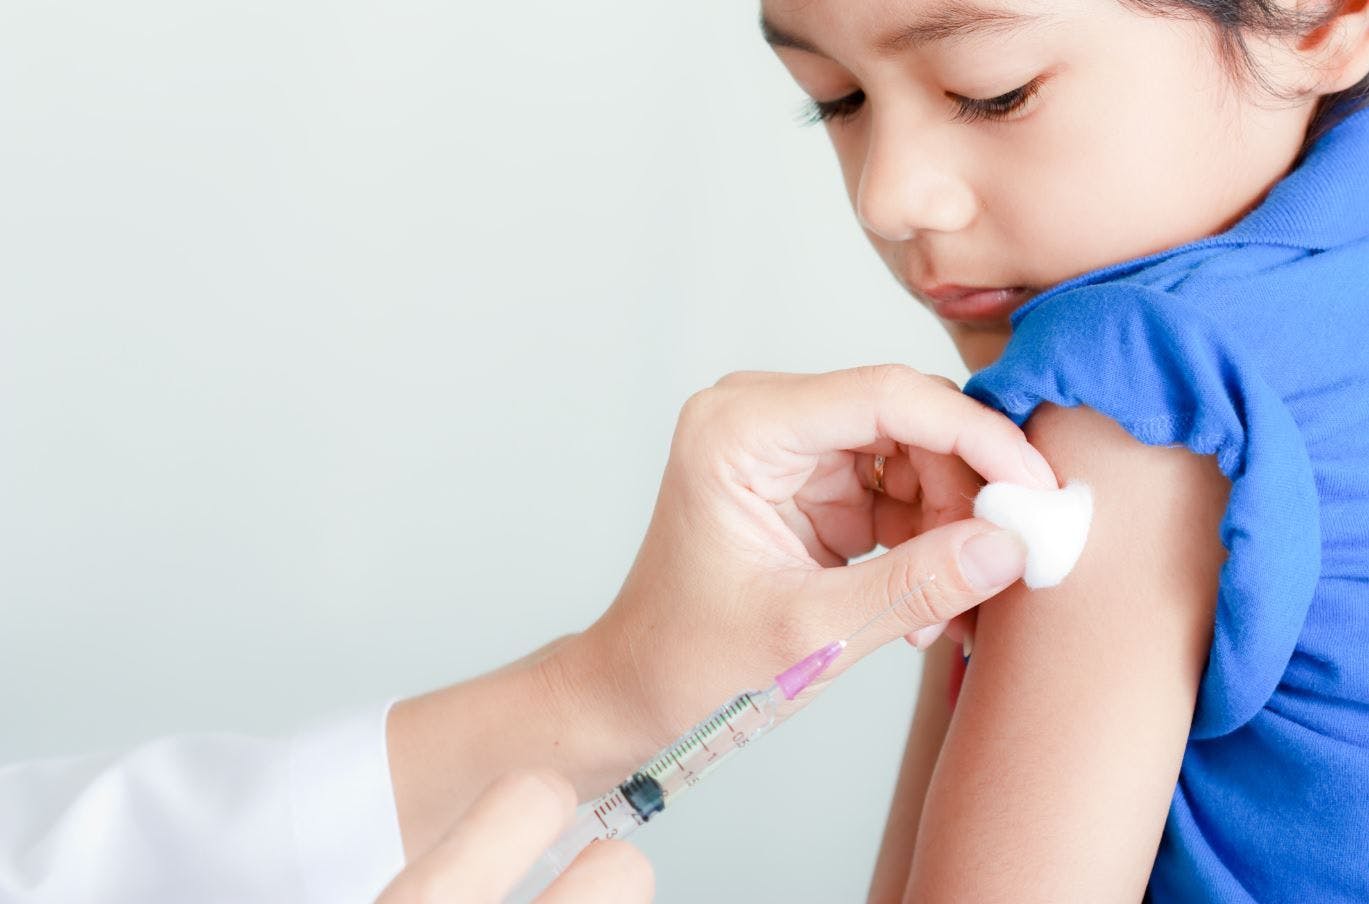 Vaccination Provides Moderate Protection against Long COVID in Children / Image credit: ©Sula Nualpradid/AdobeStock